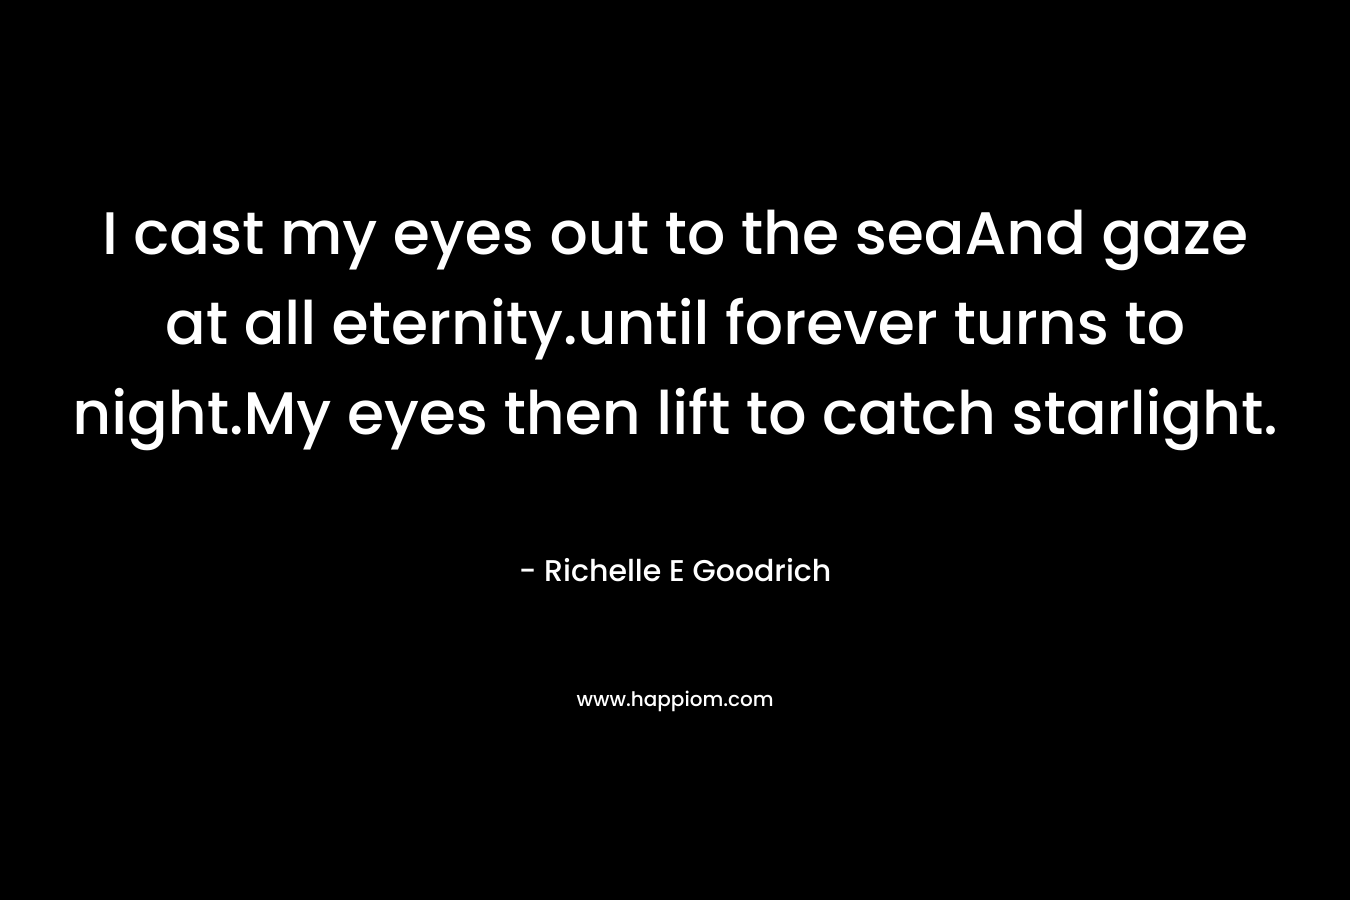 I cast my eyes out to the seaAnd gaze at all eternity.until forever turns to night.My eyes then lift to catch starlight.